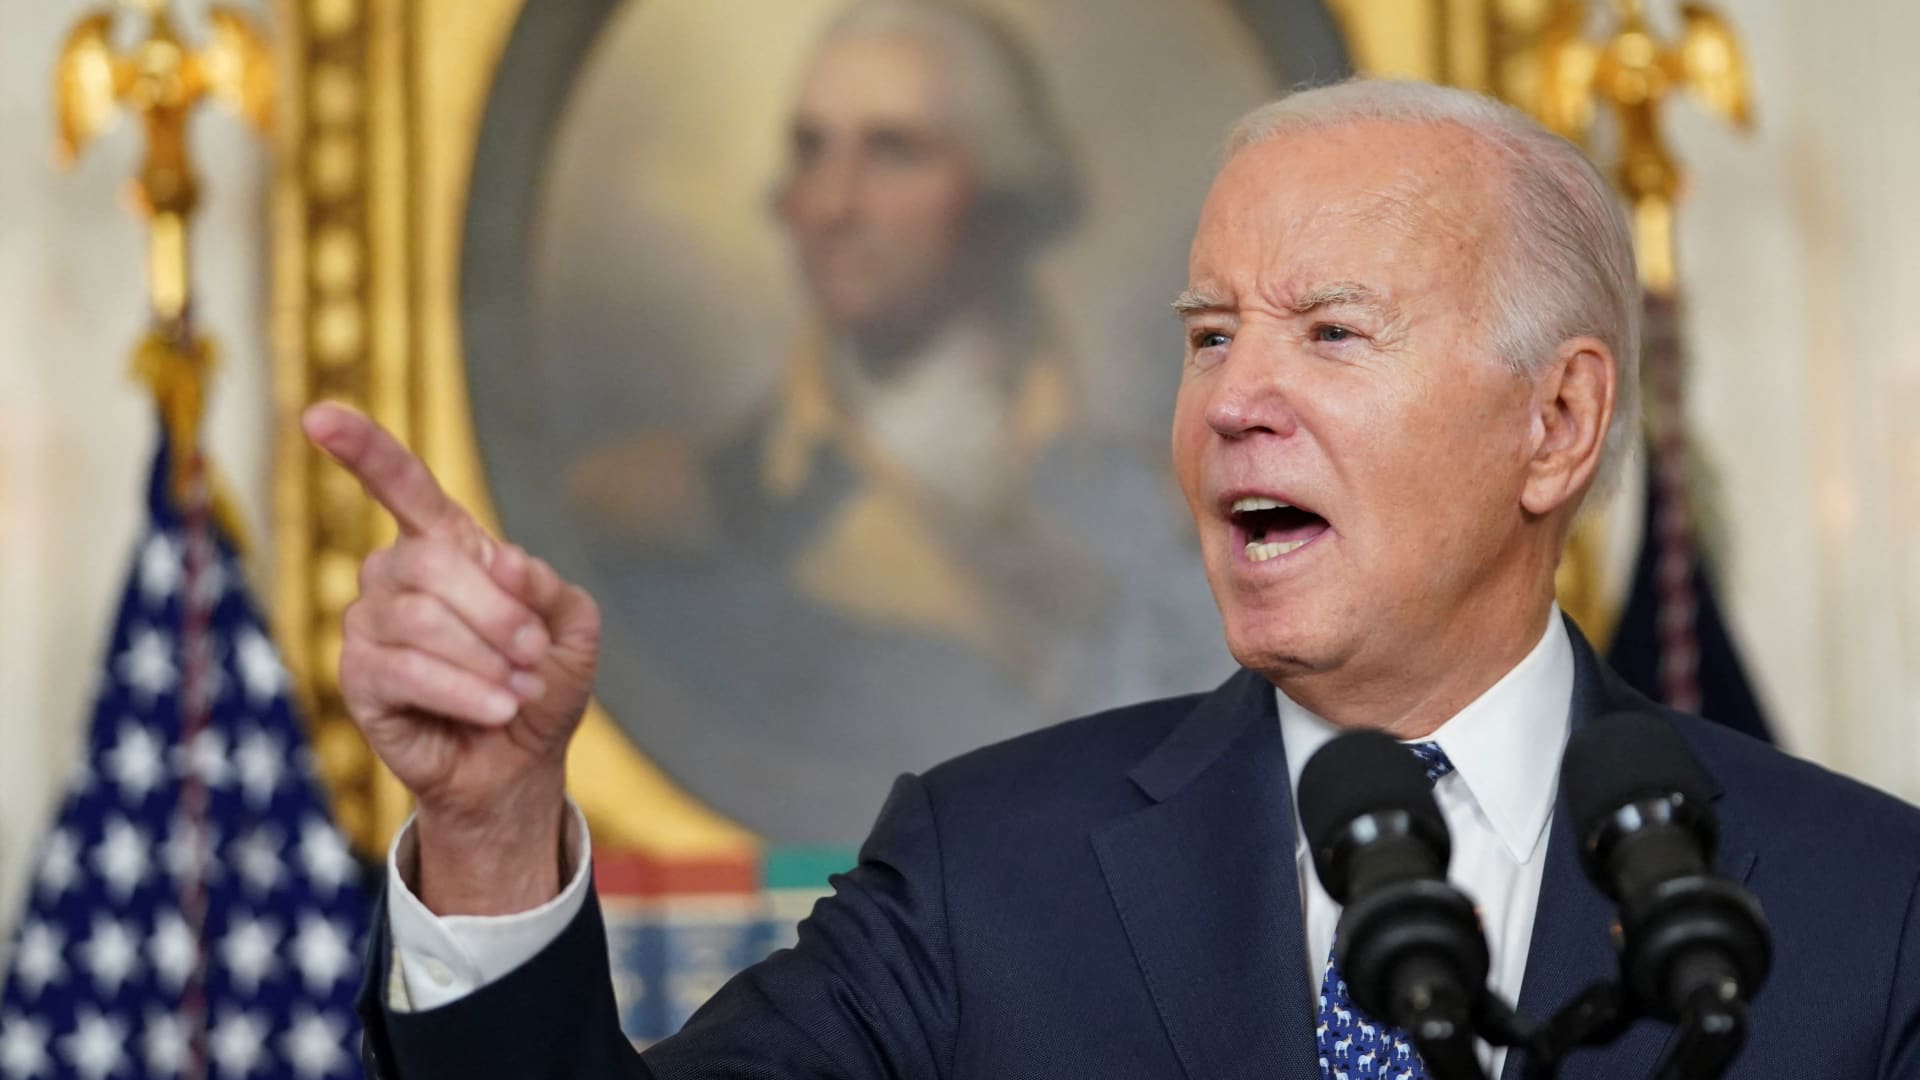 Biden disputes special counsel report, says memory ‘fine’